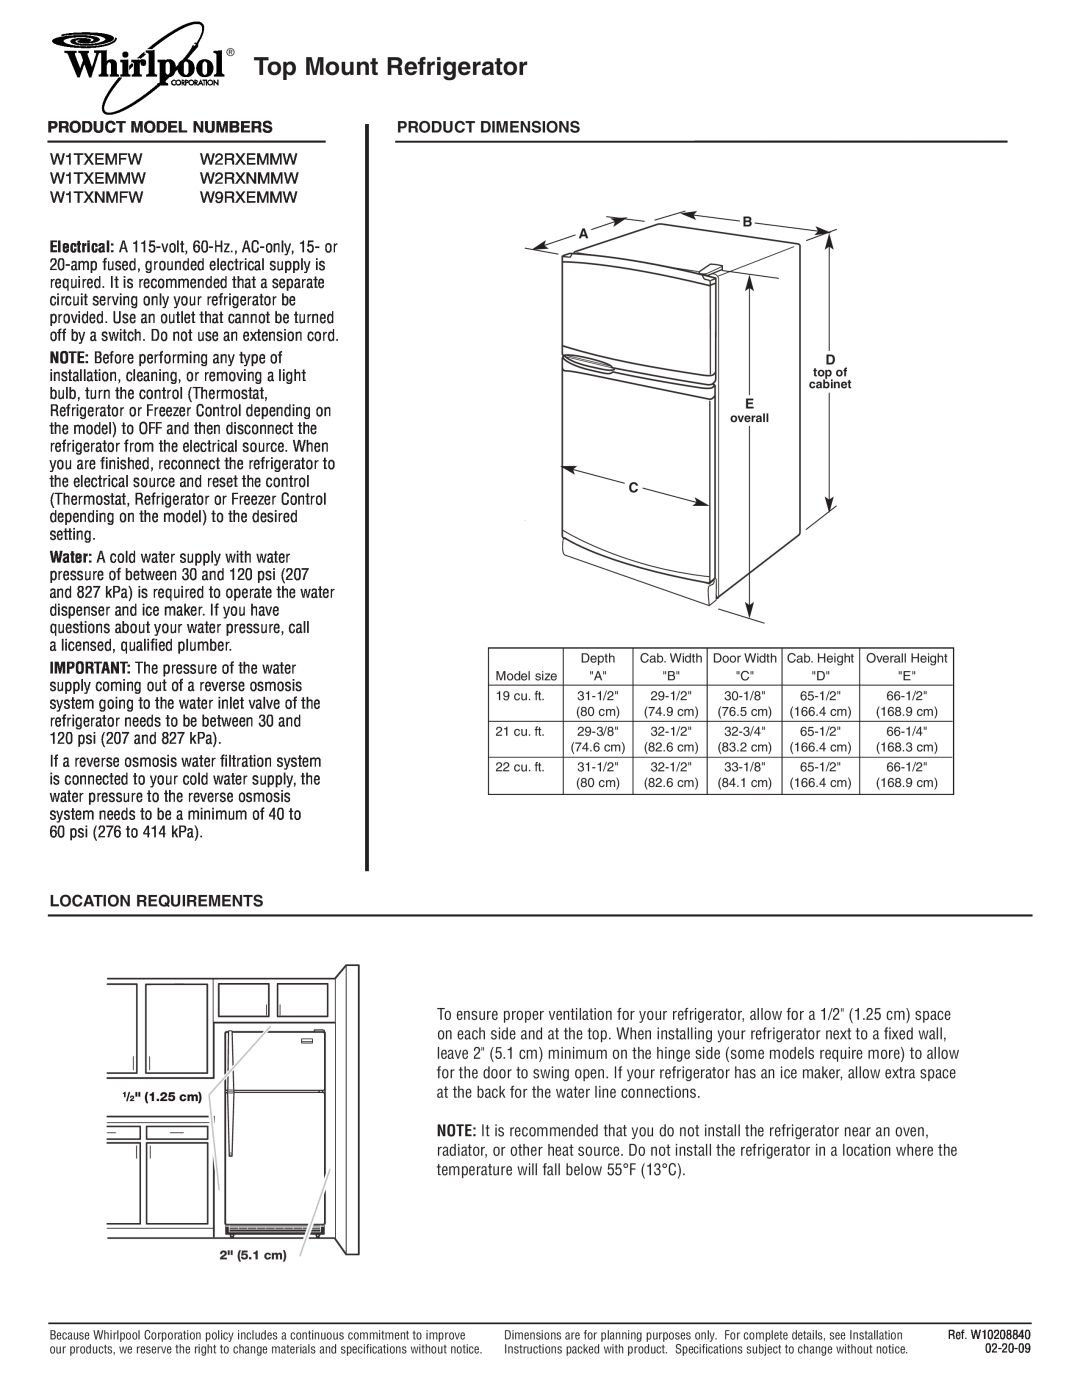 Whirlpool W2RXEMMW dimensions Top Mount Refrigerator, Product Model Numbers, Product Dimensions, Location Requirements 